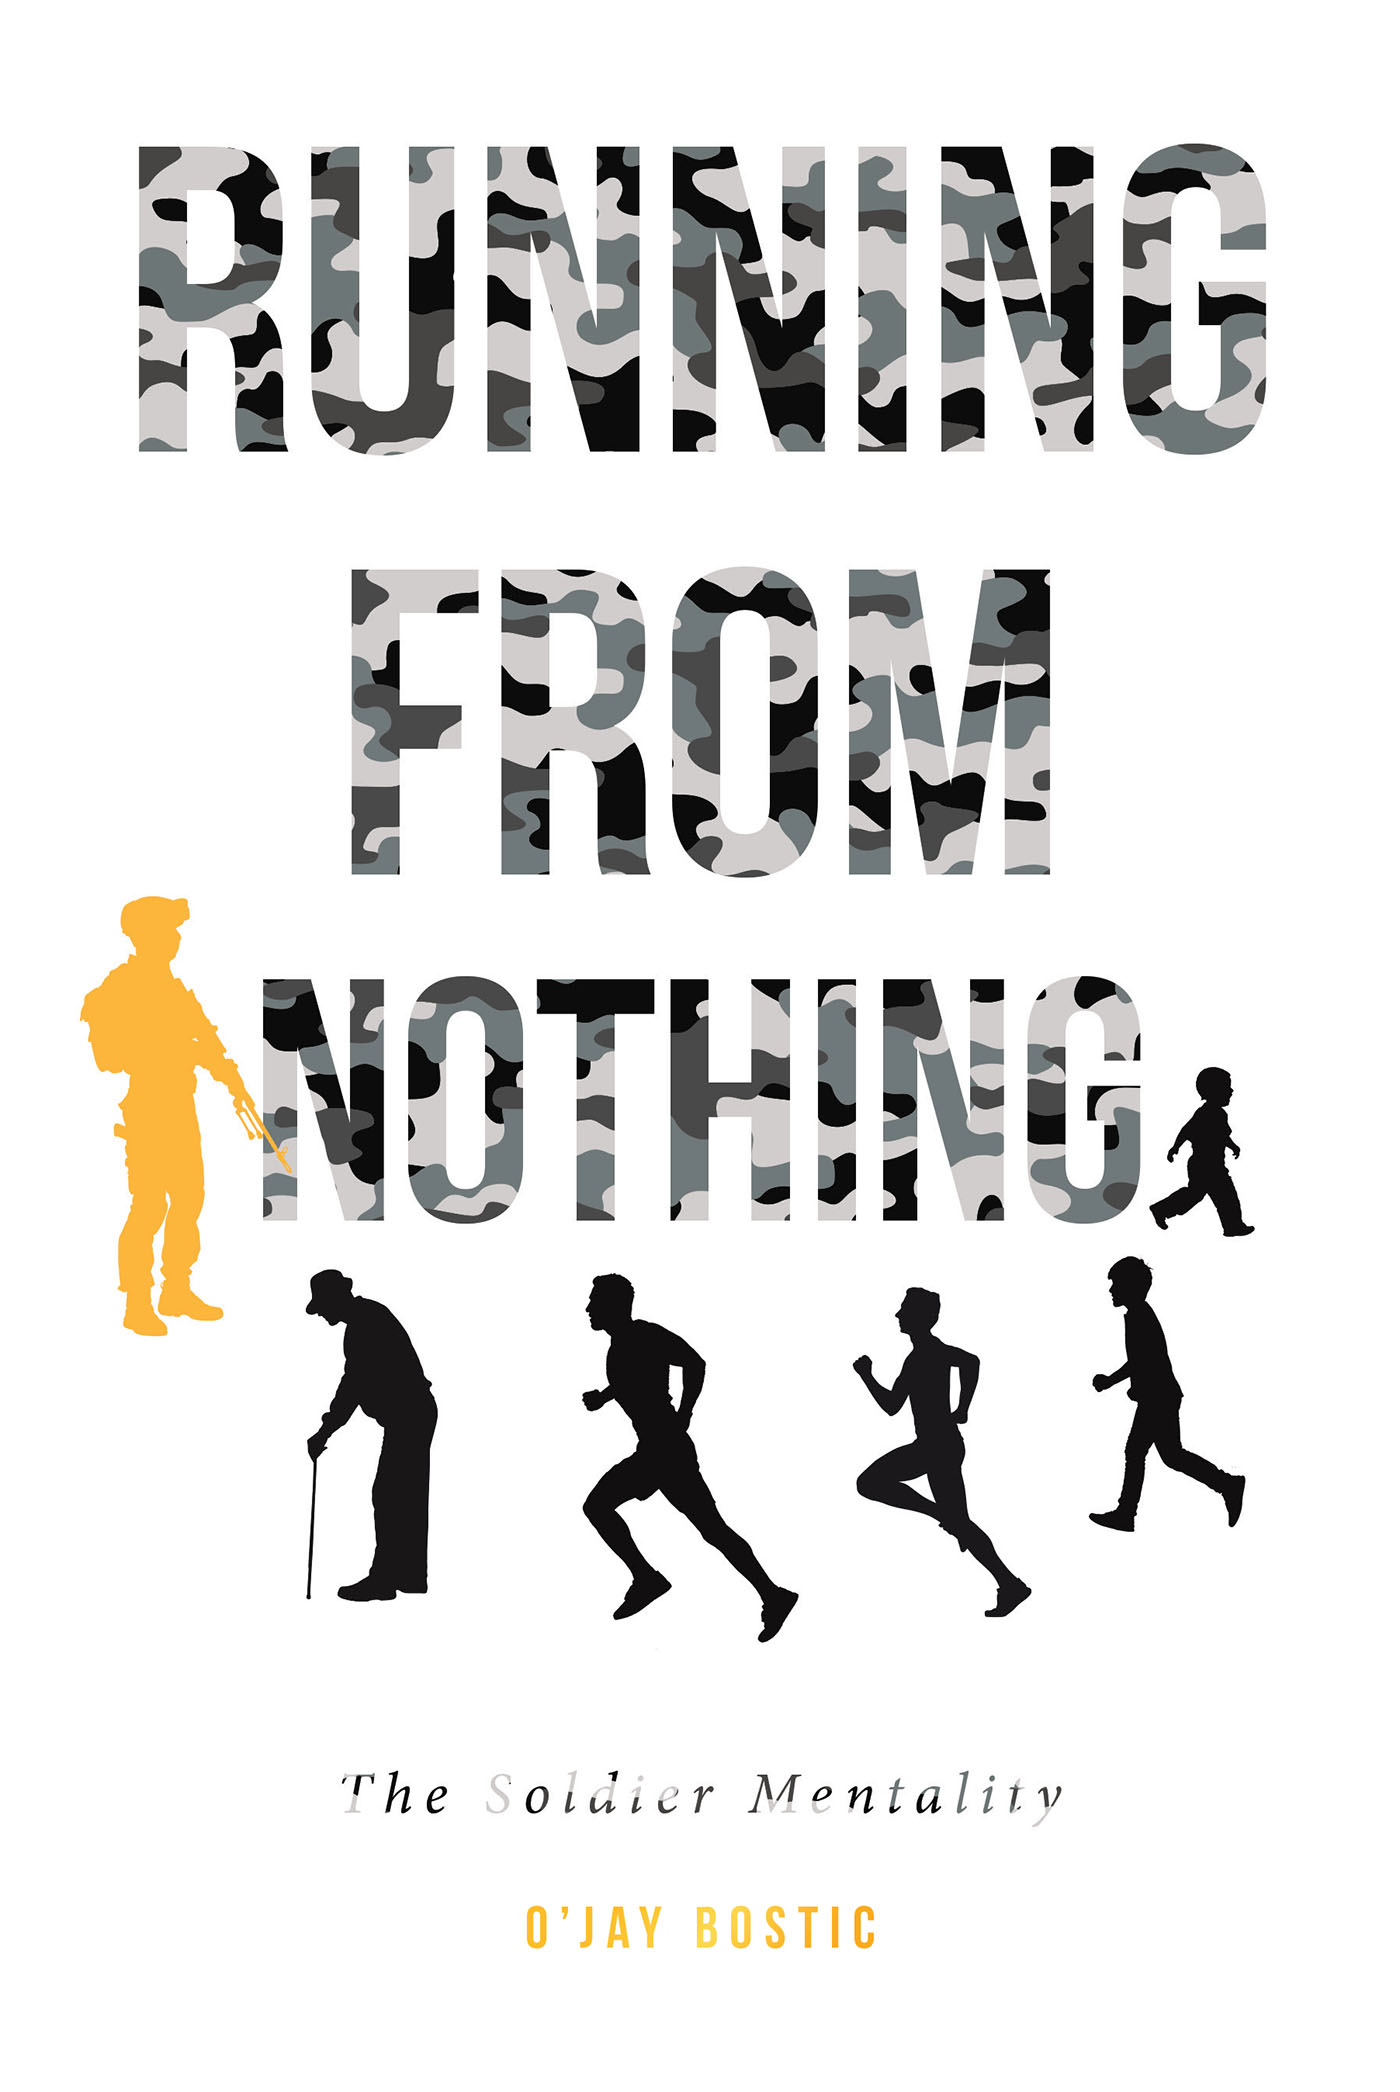 O'Jay Bostic’s New Book, “Running From Nothing: The Soldier Mentality,” is a Heartfelt and Stirring Tale About Facing Life Issues That Don't Dissipate Unless Addressed